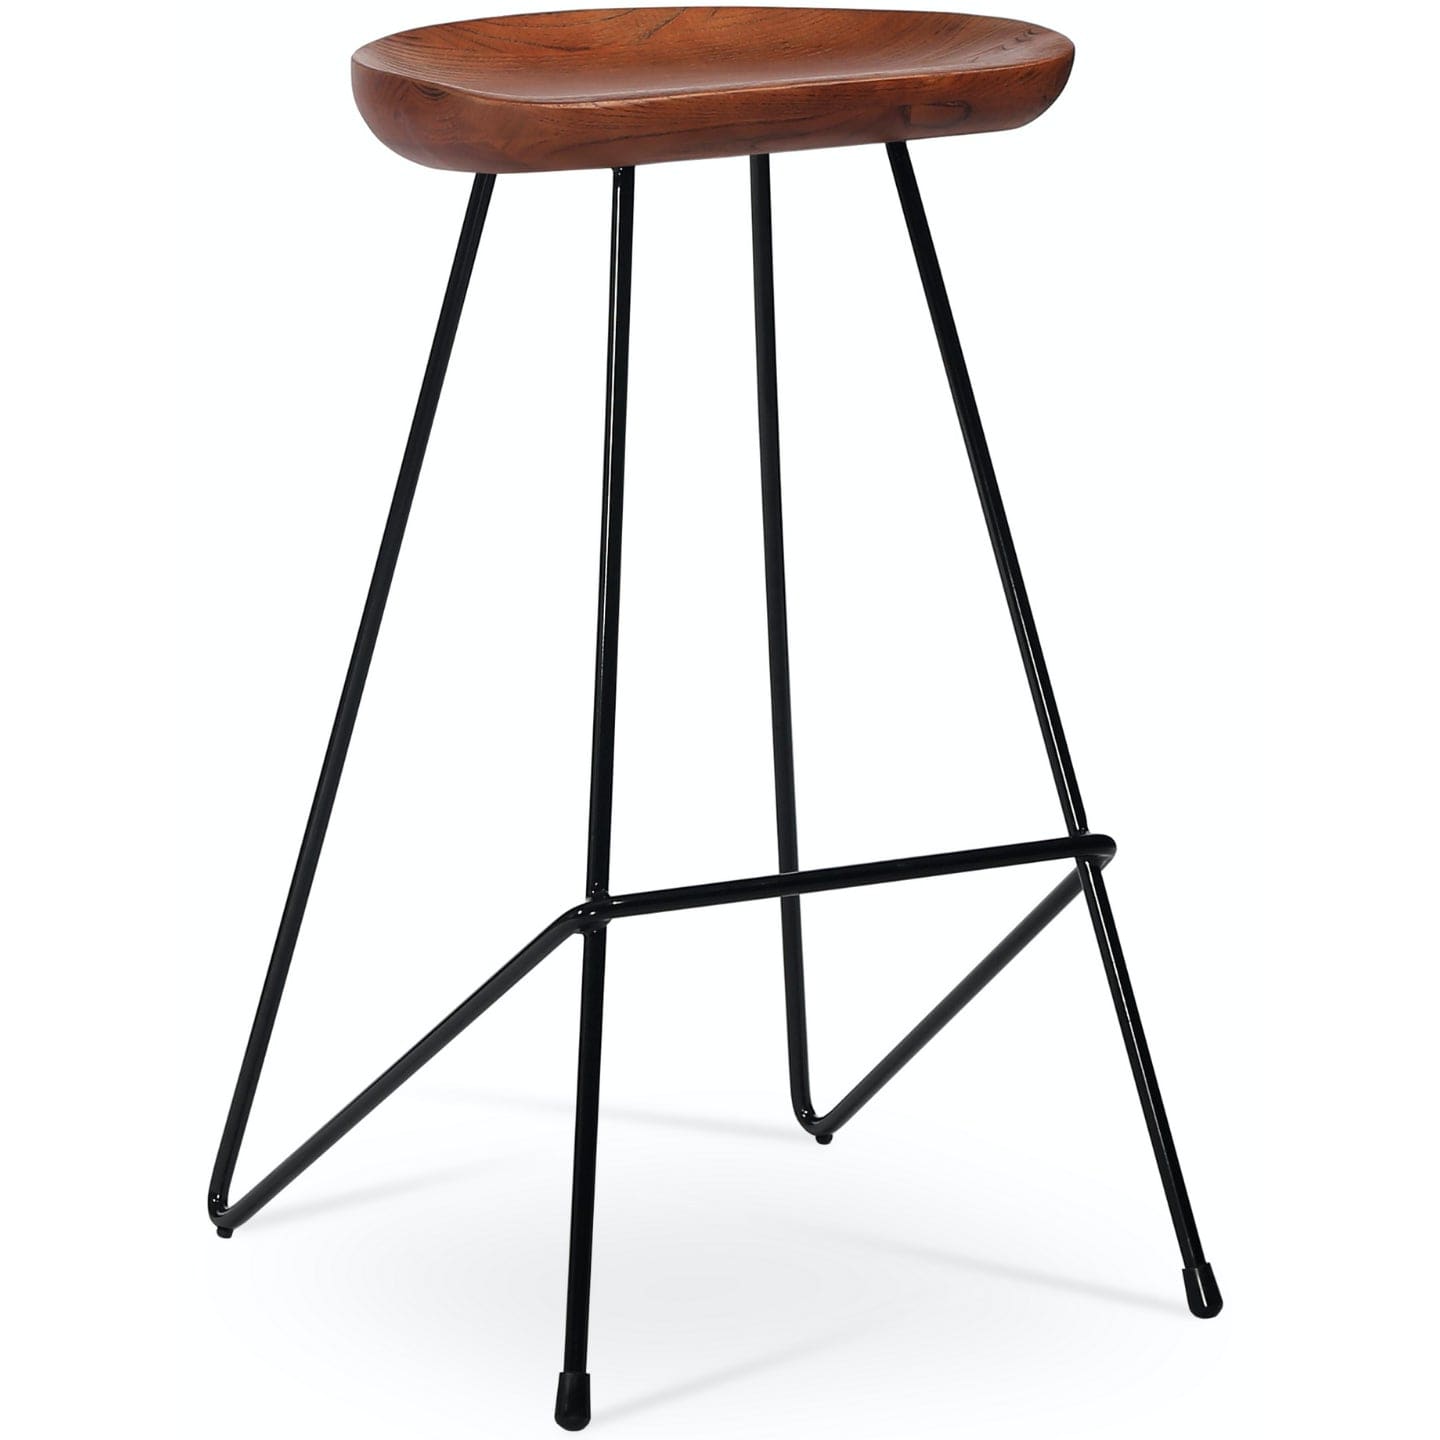 Soho Concept cattelan-industrial-black-metal-wire-base-wood-seat-kitchen-counter-stool-in-antique